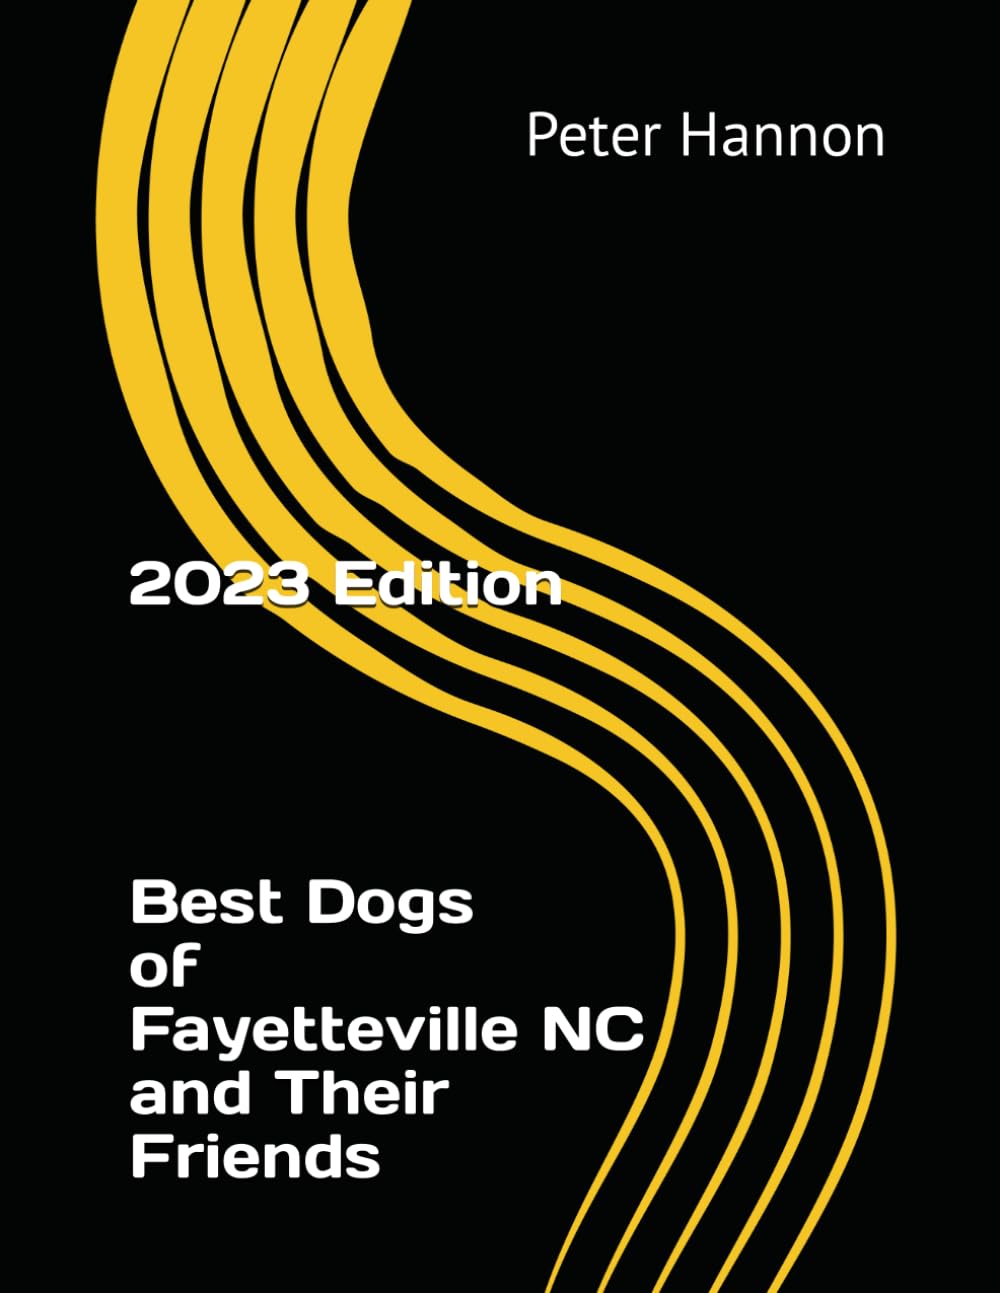 Best Dogs of Fayetteville NC and Their Friends: Celebrating the Canine Companions and Connections in Fayetteville, North Carolina